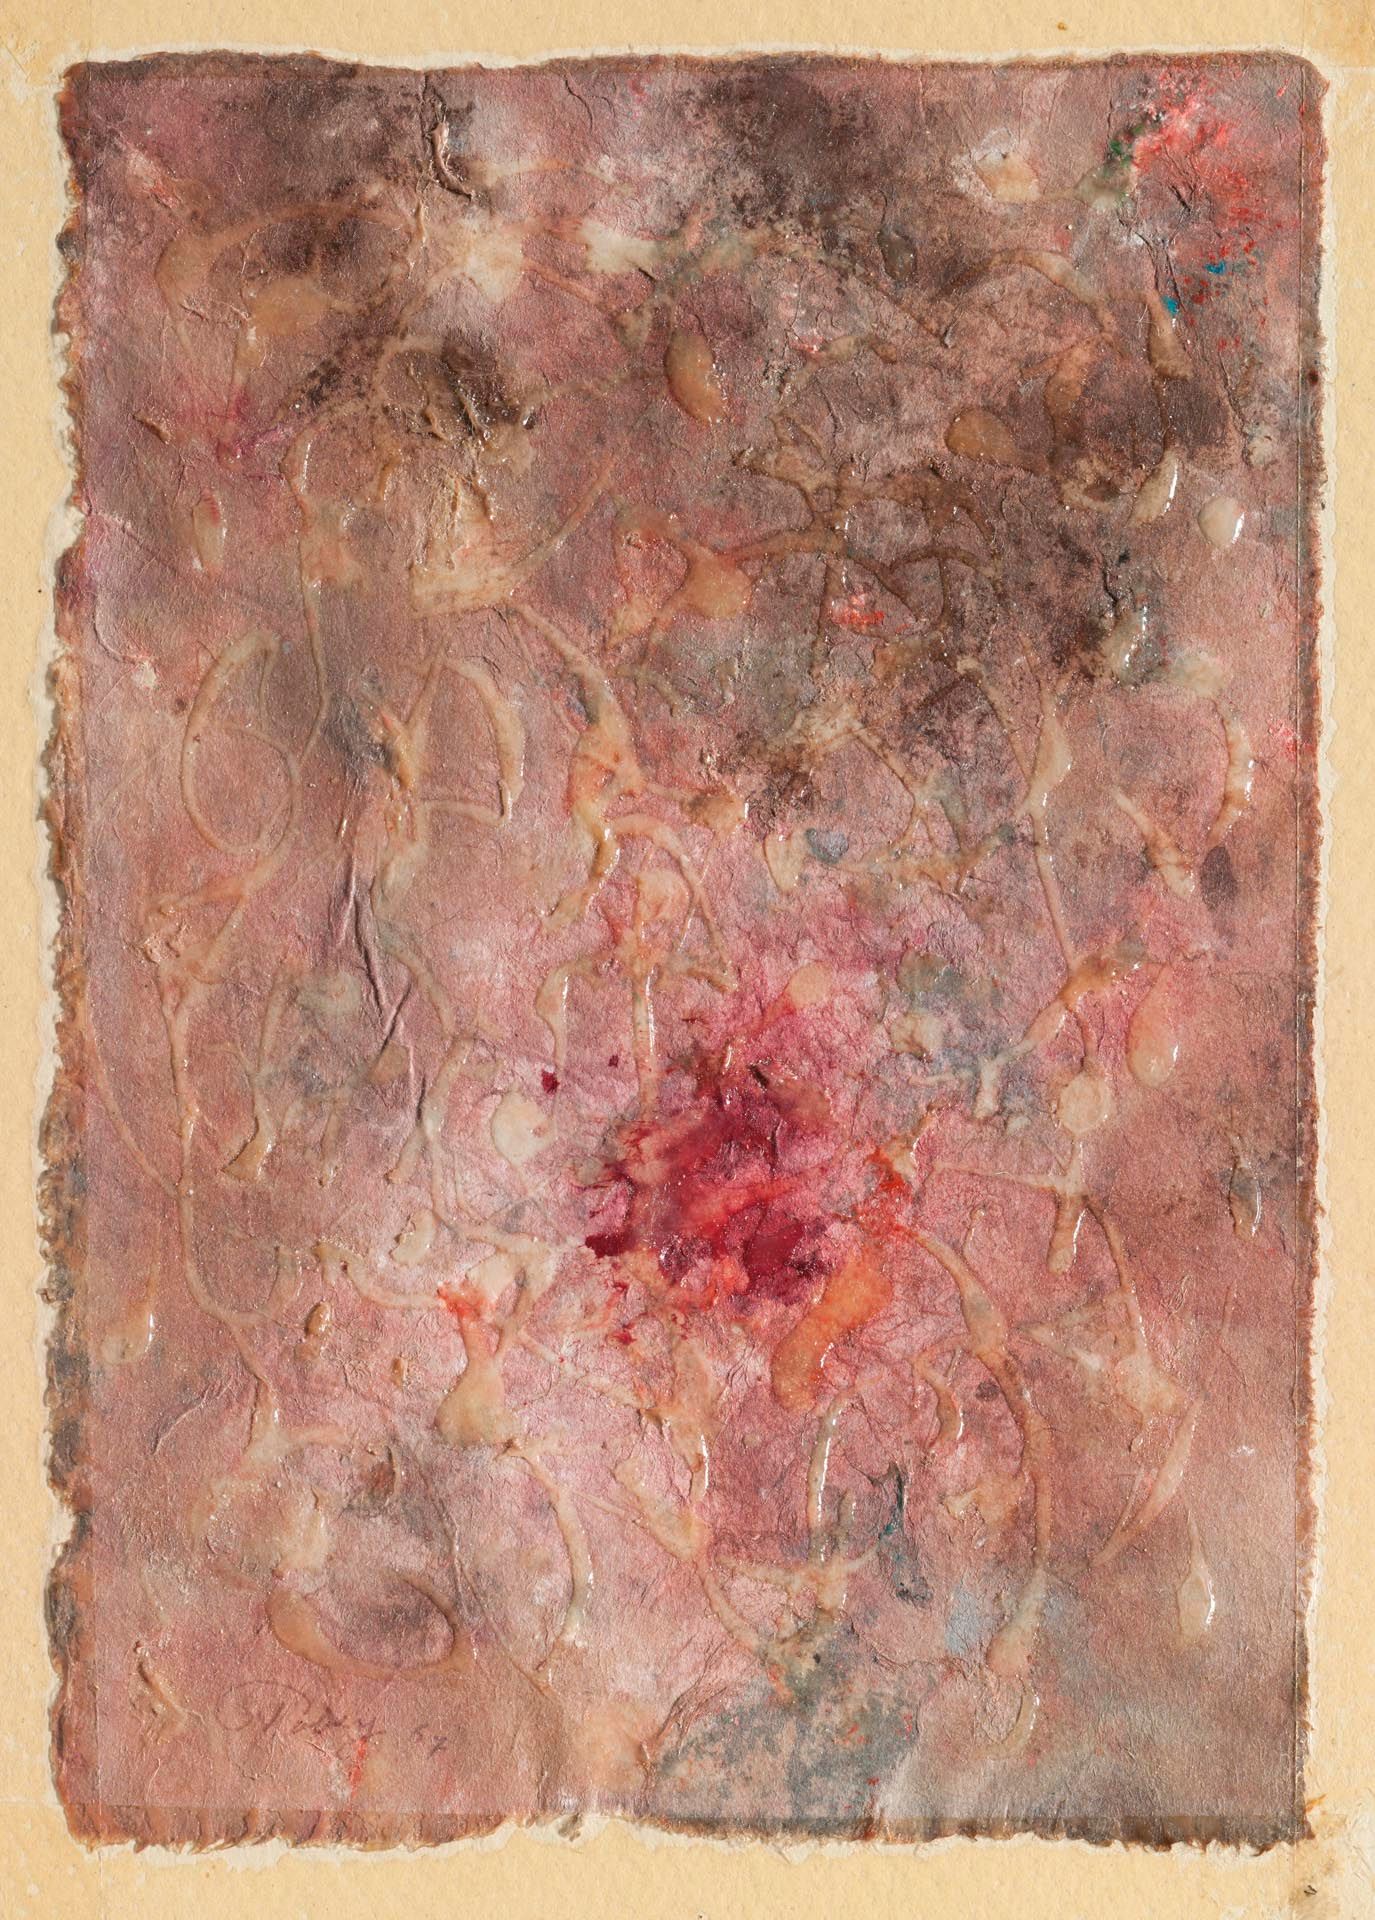 Mark Tobey (Centerville 1890 – Basel/Basilea 1976) Untitled, 1969

Monotype with&hellip;